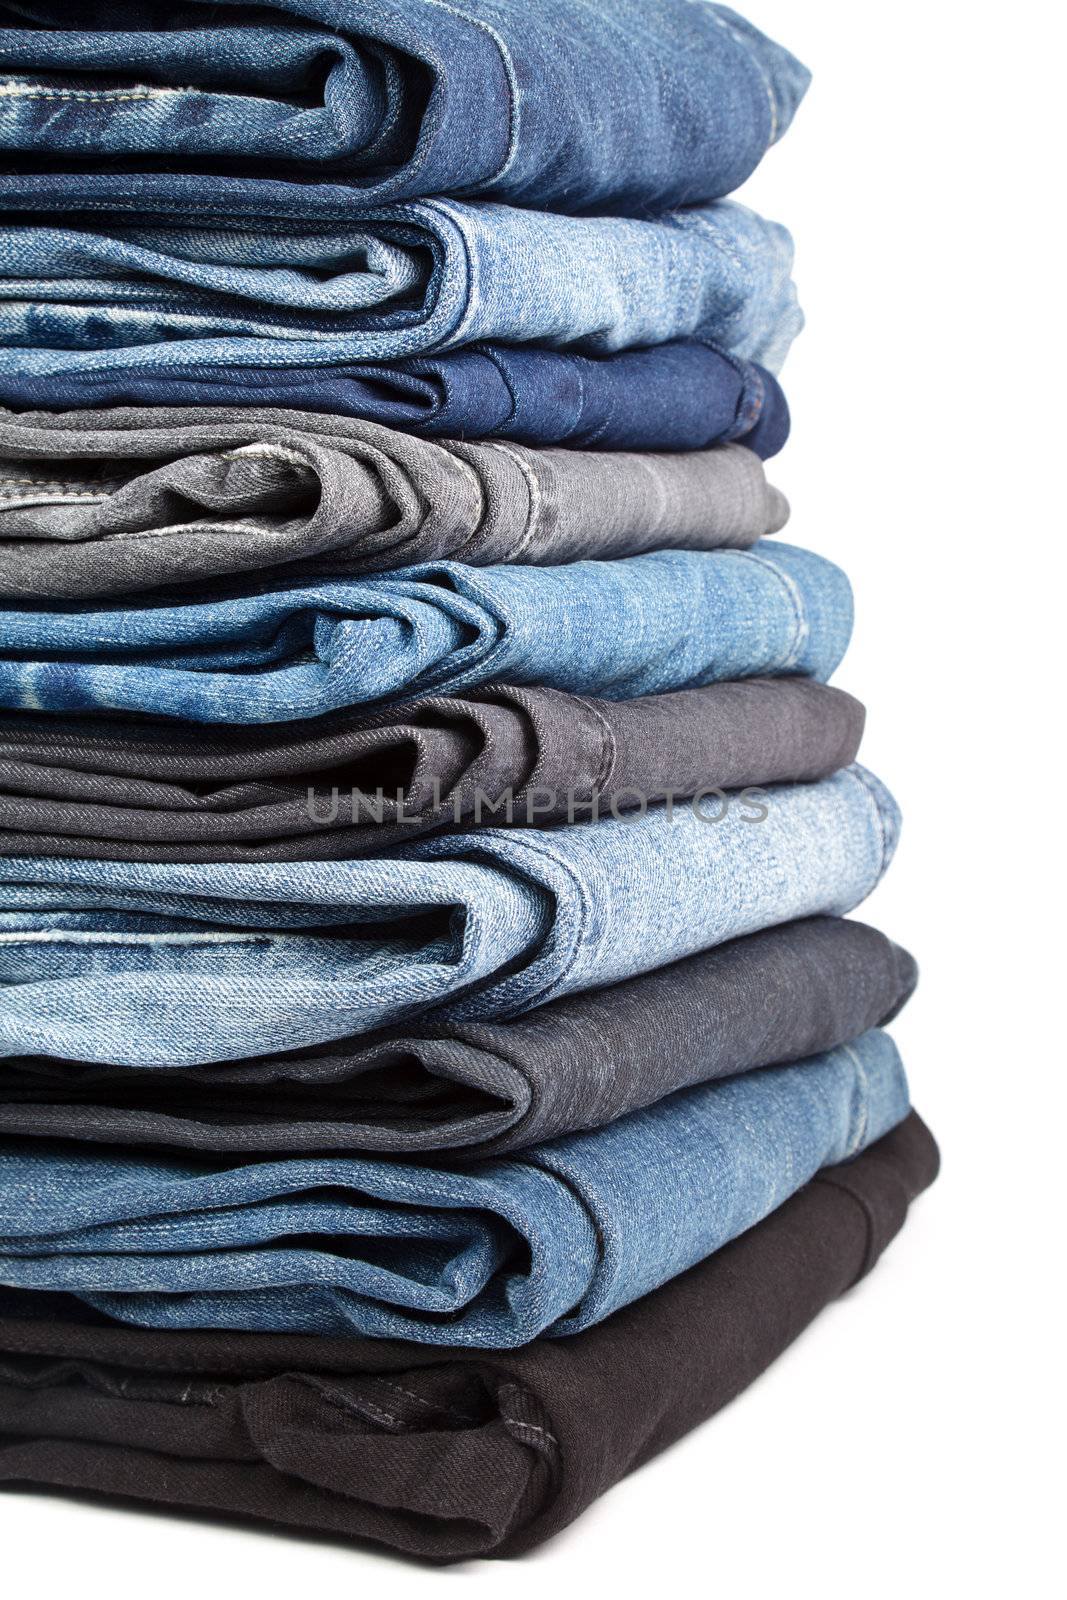 Stack of blue and black Jeans on white background